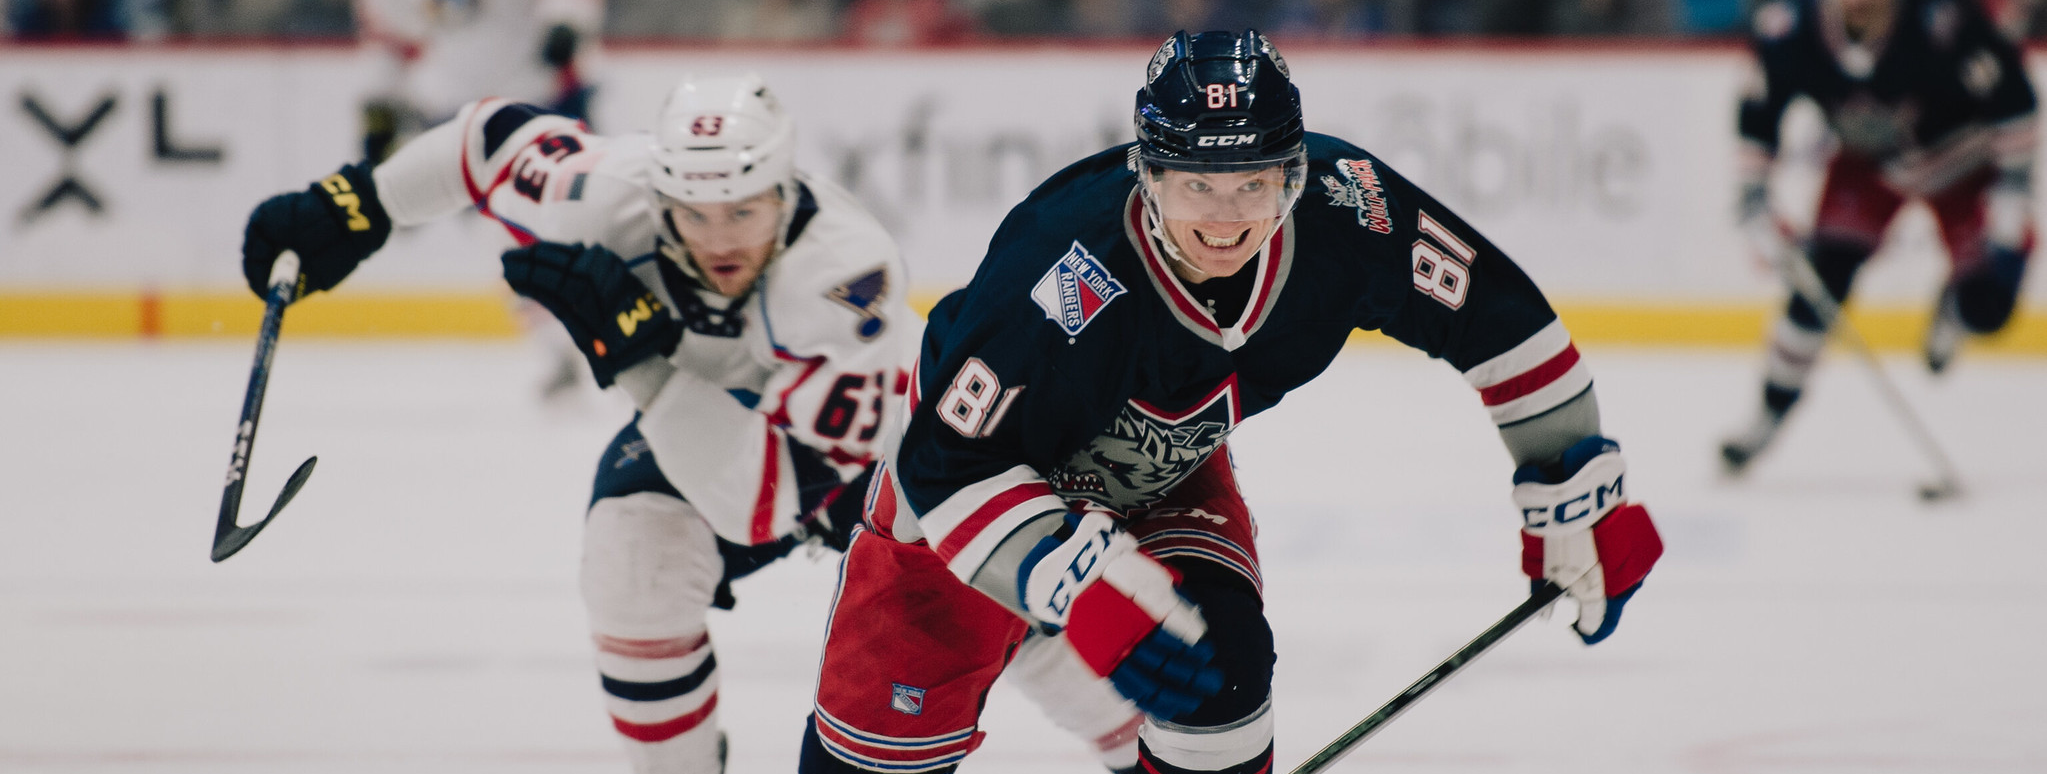 PRE-GAME REPORT: THE ‘I-91 RIVALRY’ COMES TO HARTFORD AS WOLF PACK HOST THUNDERBIRDS